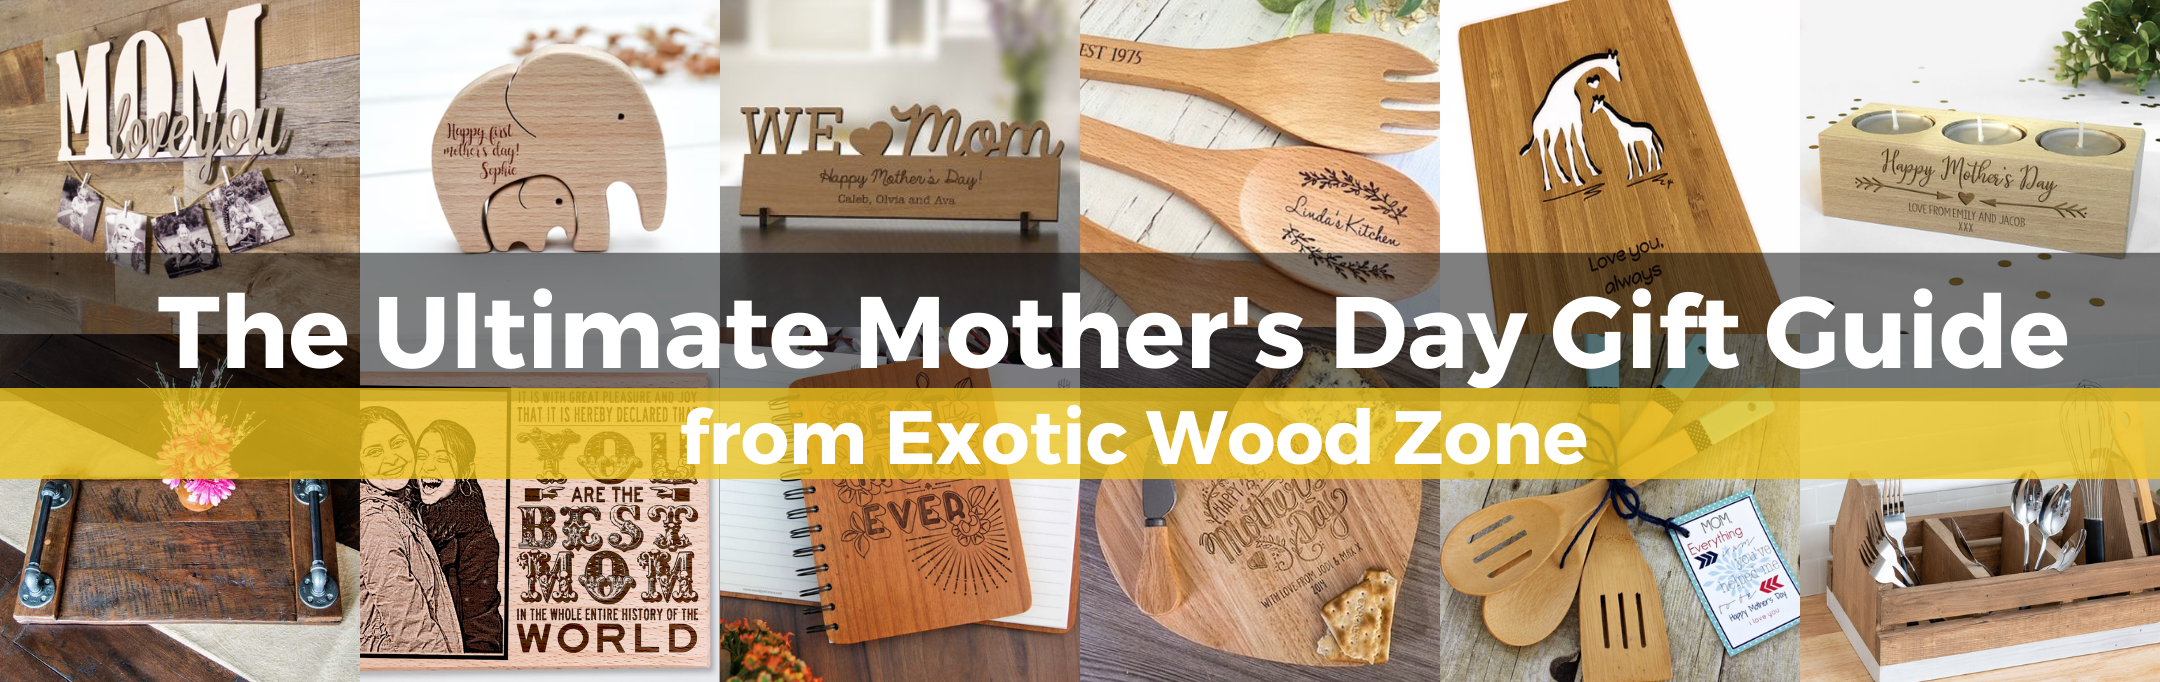 The Ultimate Mother's Day Gift Guide from Exotic Wood Zone